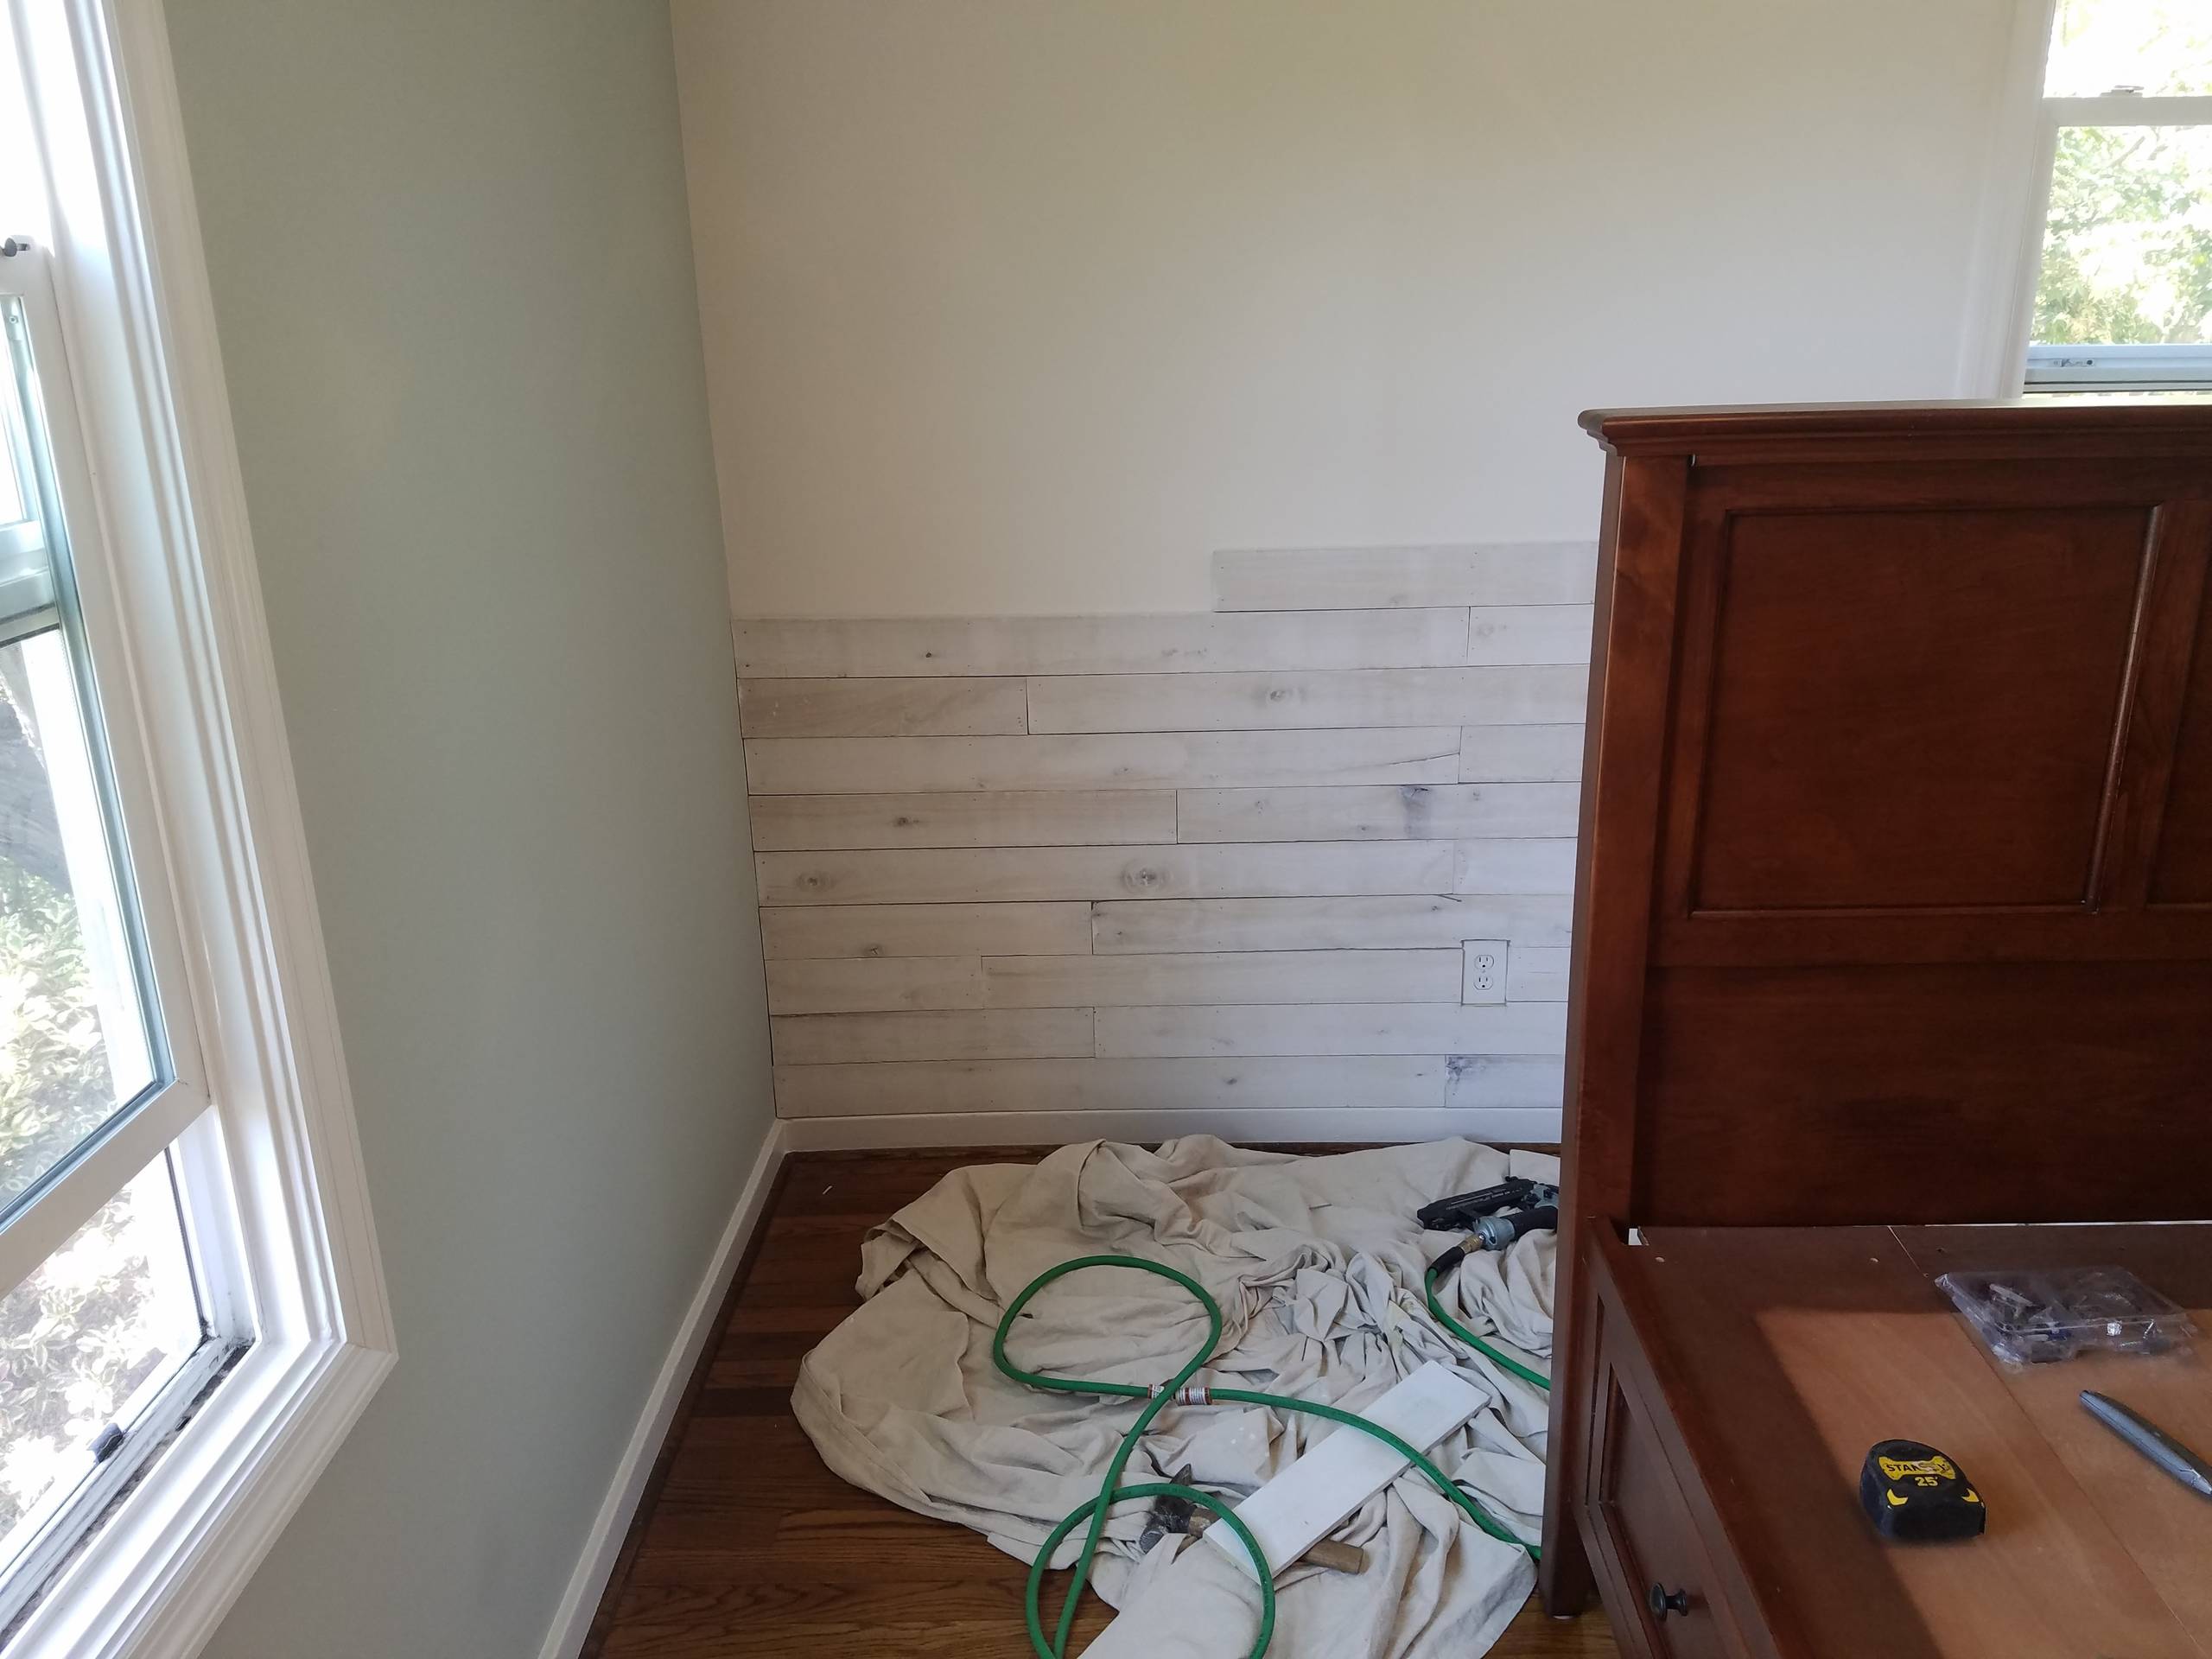 accent wood plank wall